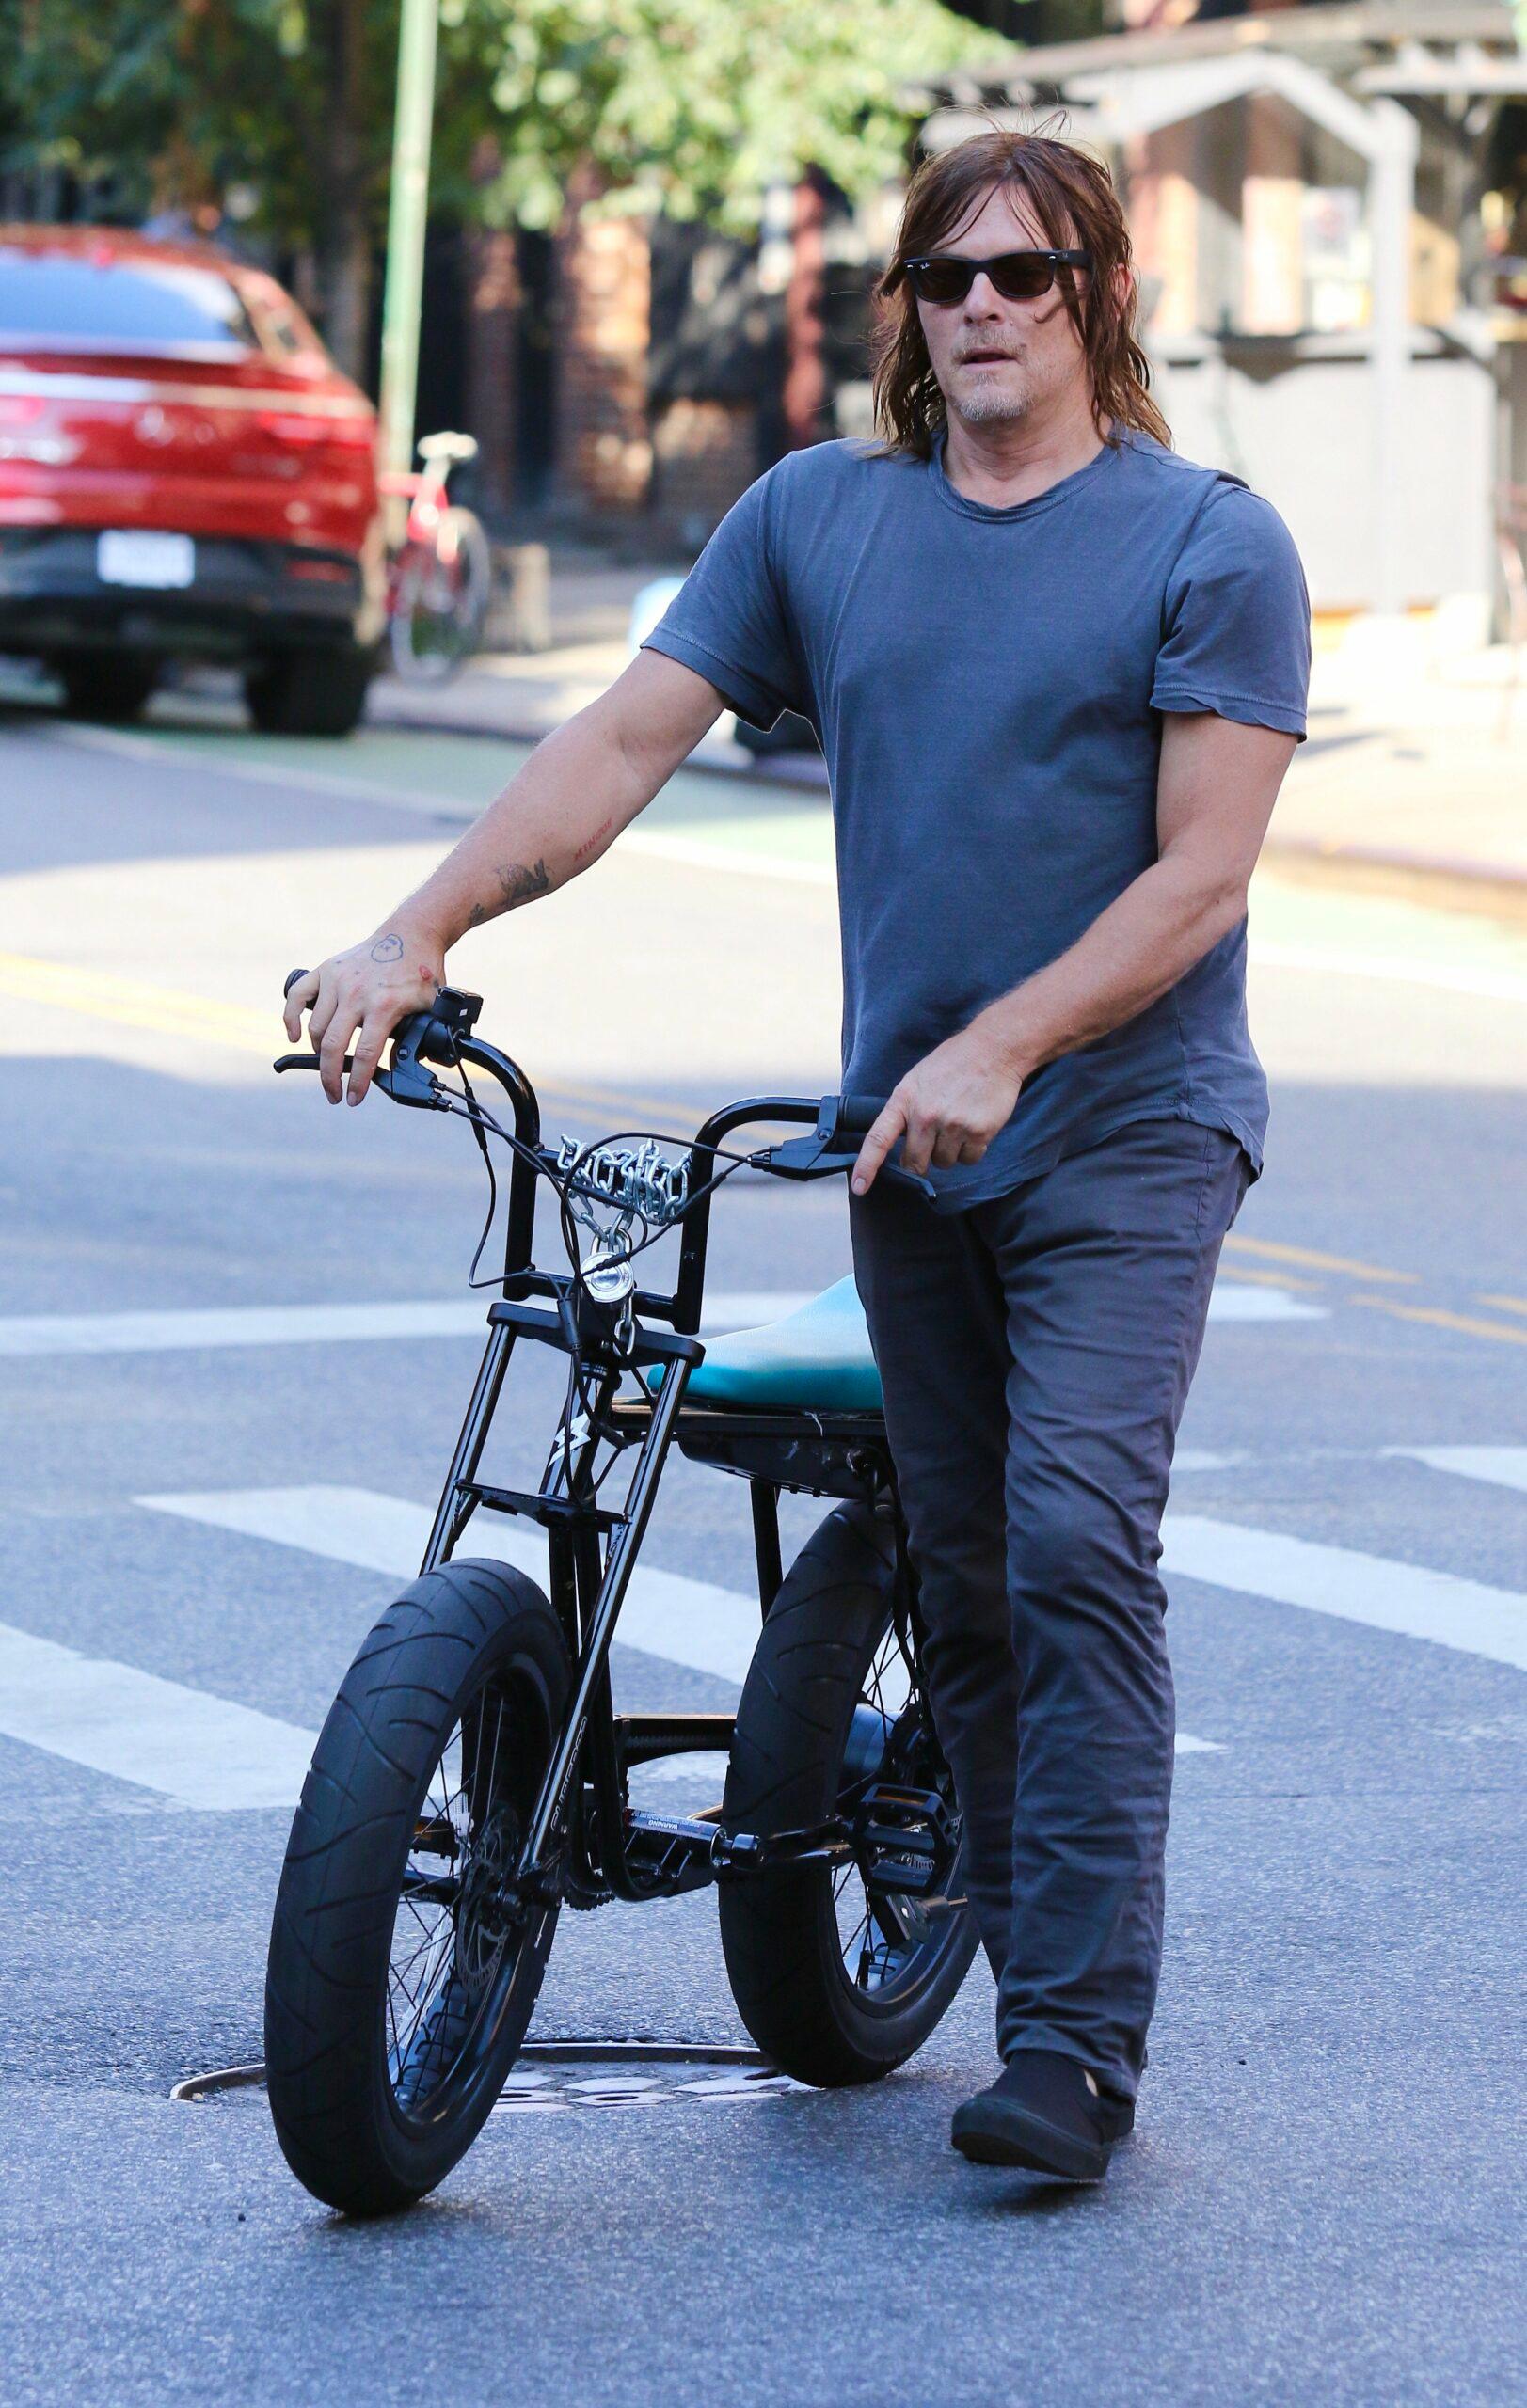 Norman Reedus walks home after a bike ride in NYC